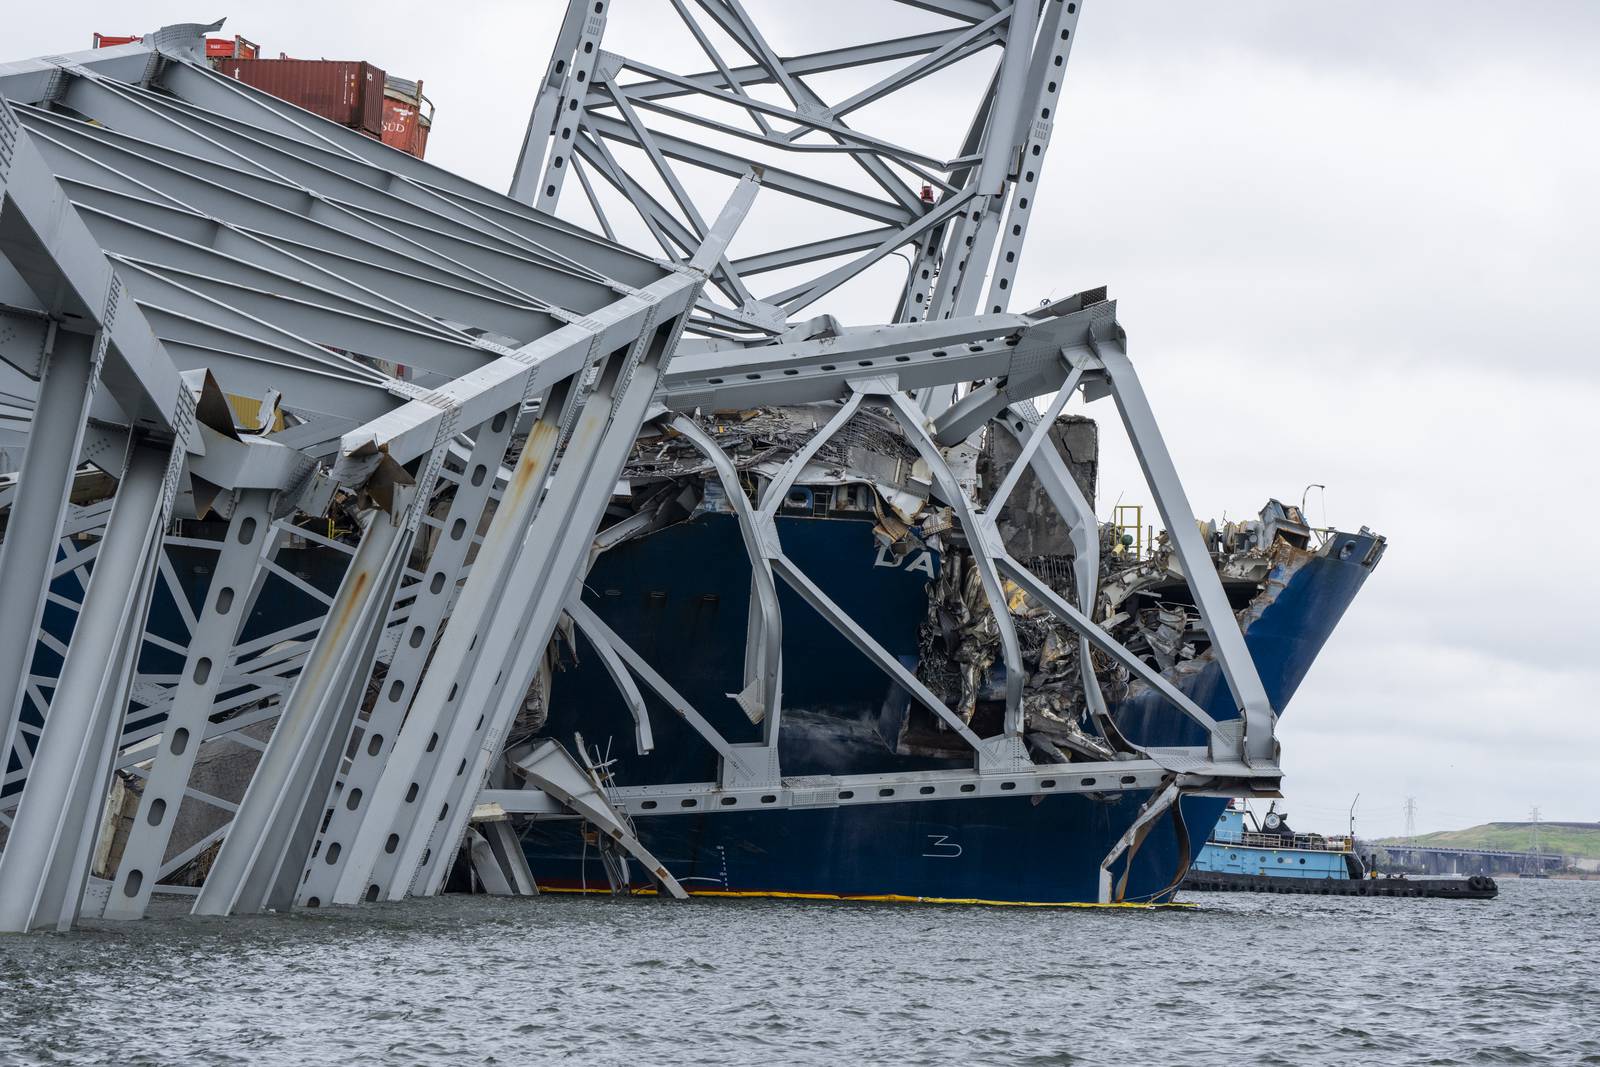 The Dali, a massive container ship from Singapore,  still sits in the wreckage and collapse of the Francis Scott Key Bridge in the Baltimore port on April 1, 2024. It has been a week since it lost power and struck the bridge , causing it to topple in seconds, taking several roadway workers and their cars with it. The once giant frame of the bridge now sits in the water and large cranes have arrived to untangle the mess.